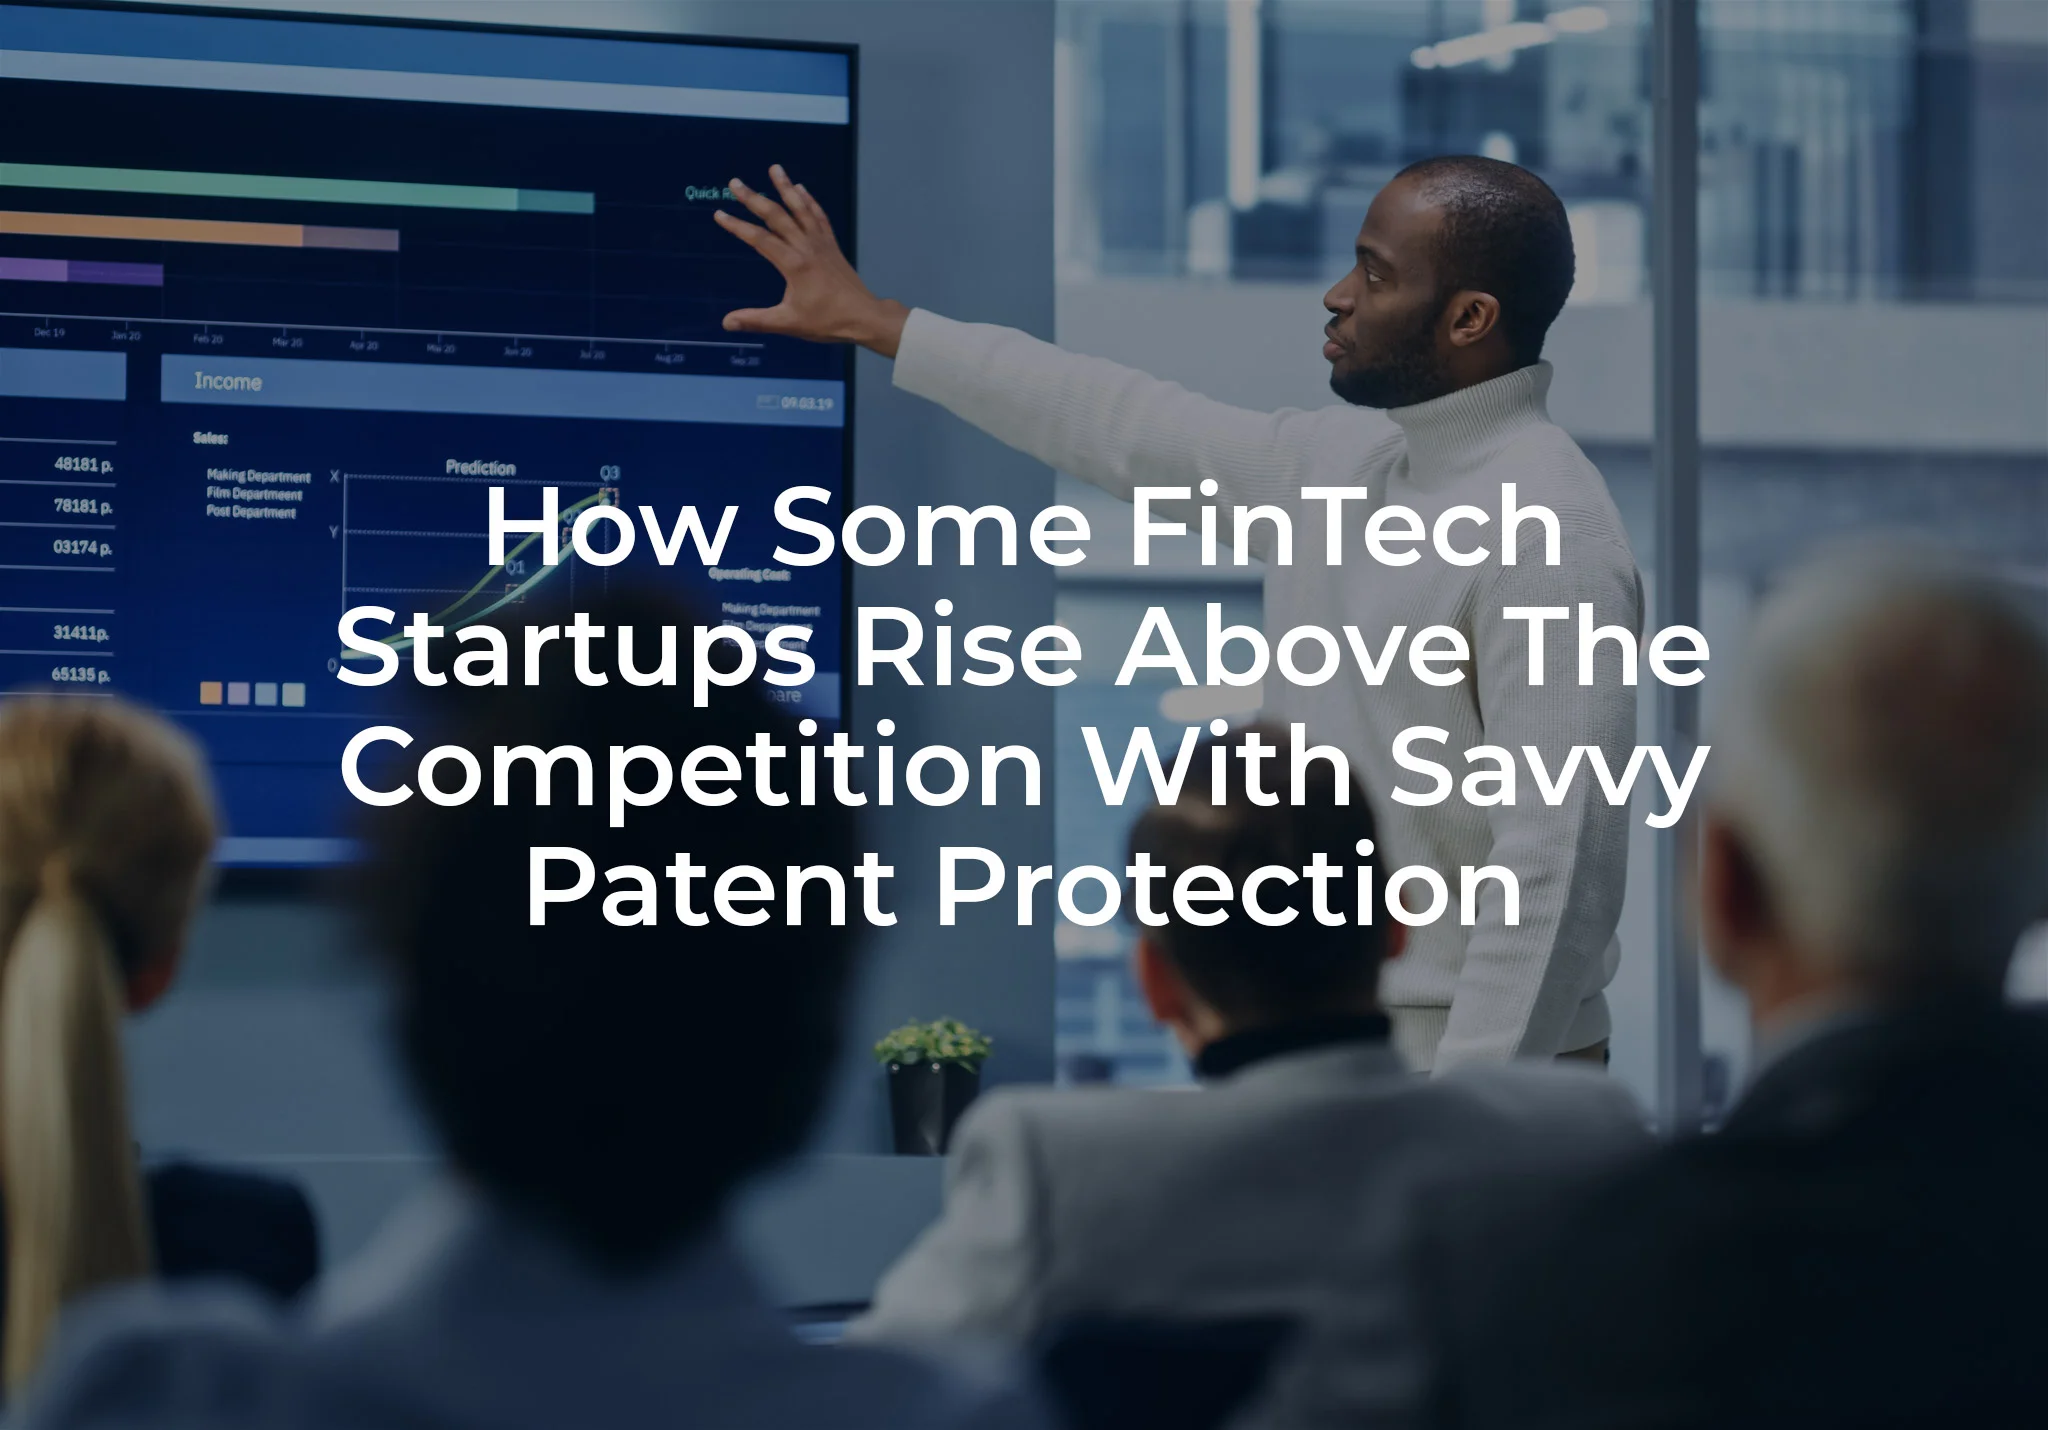 How Some FinTech Startups Rise Above The Competition With Savvy Patent Protection